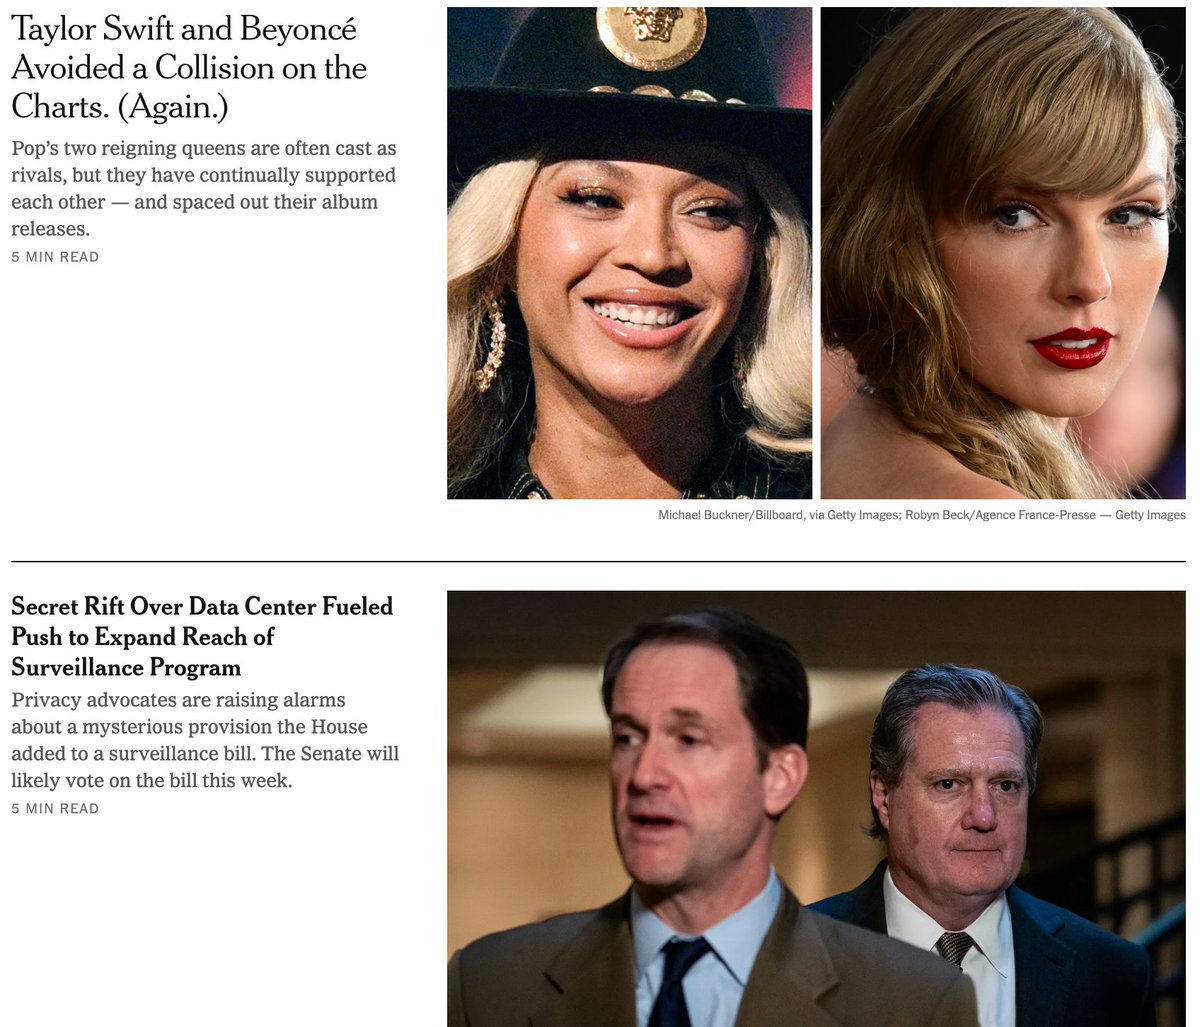 Weird semi-found art pairing on the NYT homepage right now. How many people out there are likely to click on and read both stories?